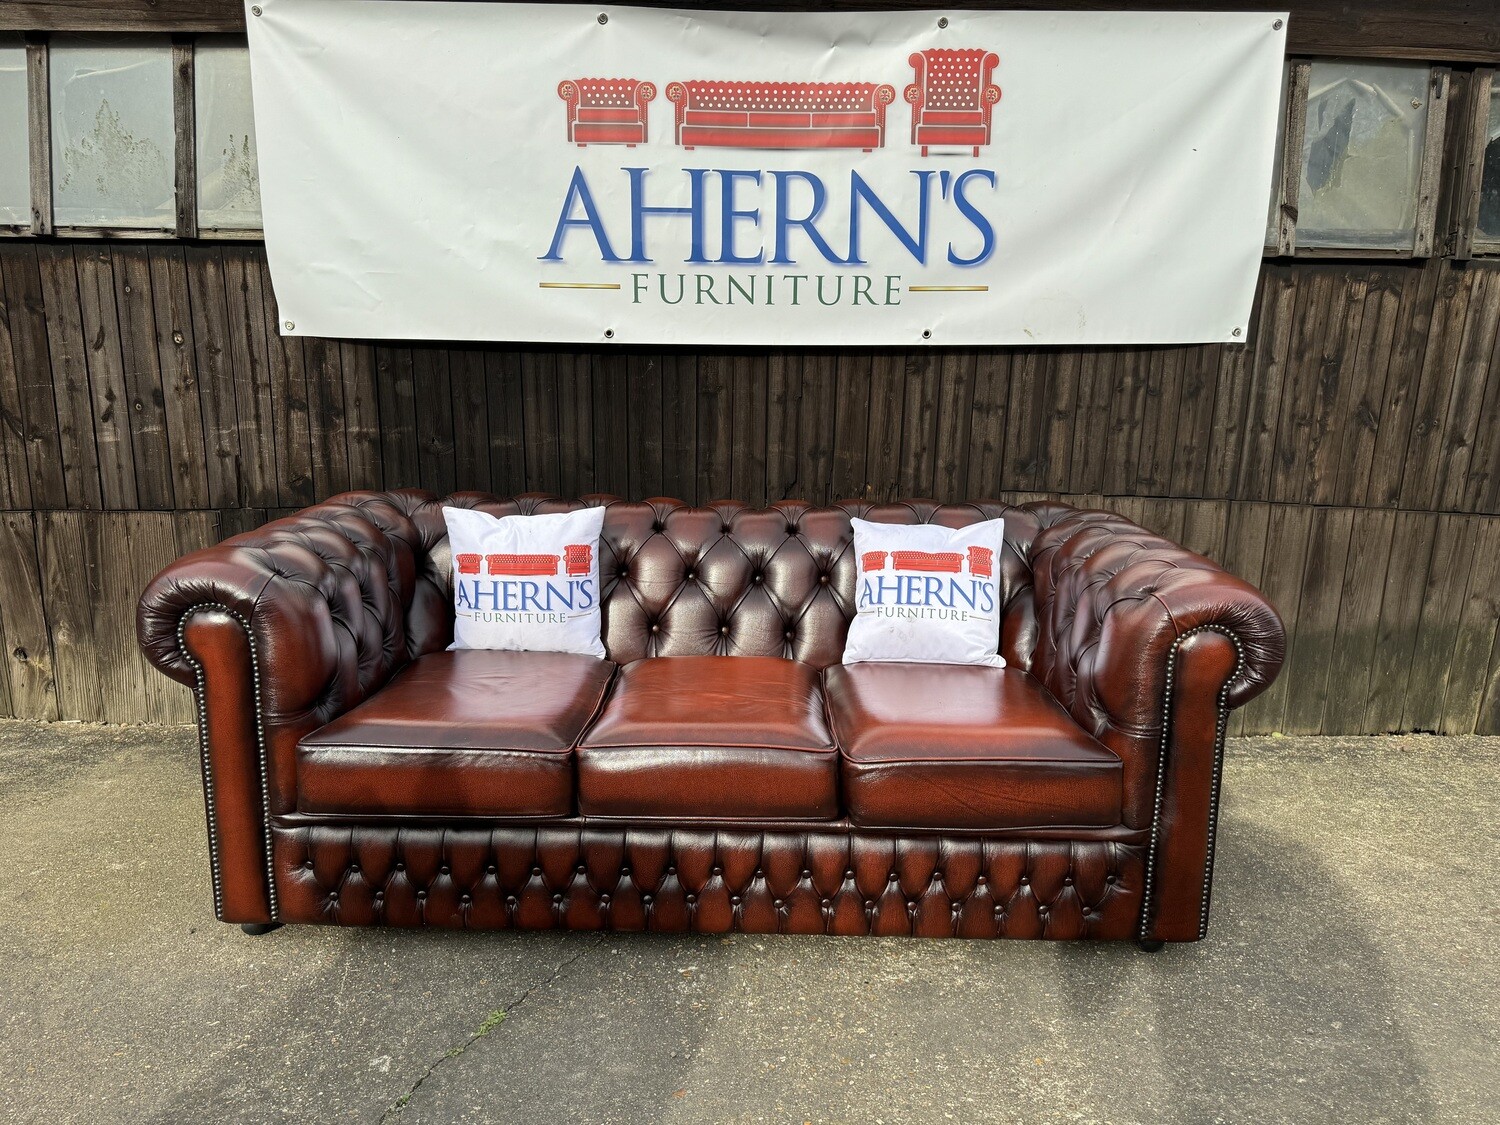 *Vintage Brown Leather Chesterfield 3 Seater Sofa FREE DELIVERY 🚚*